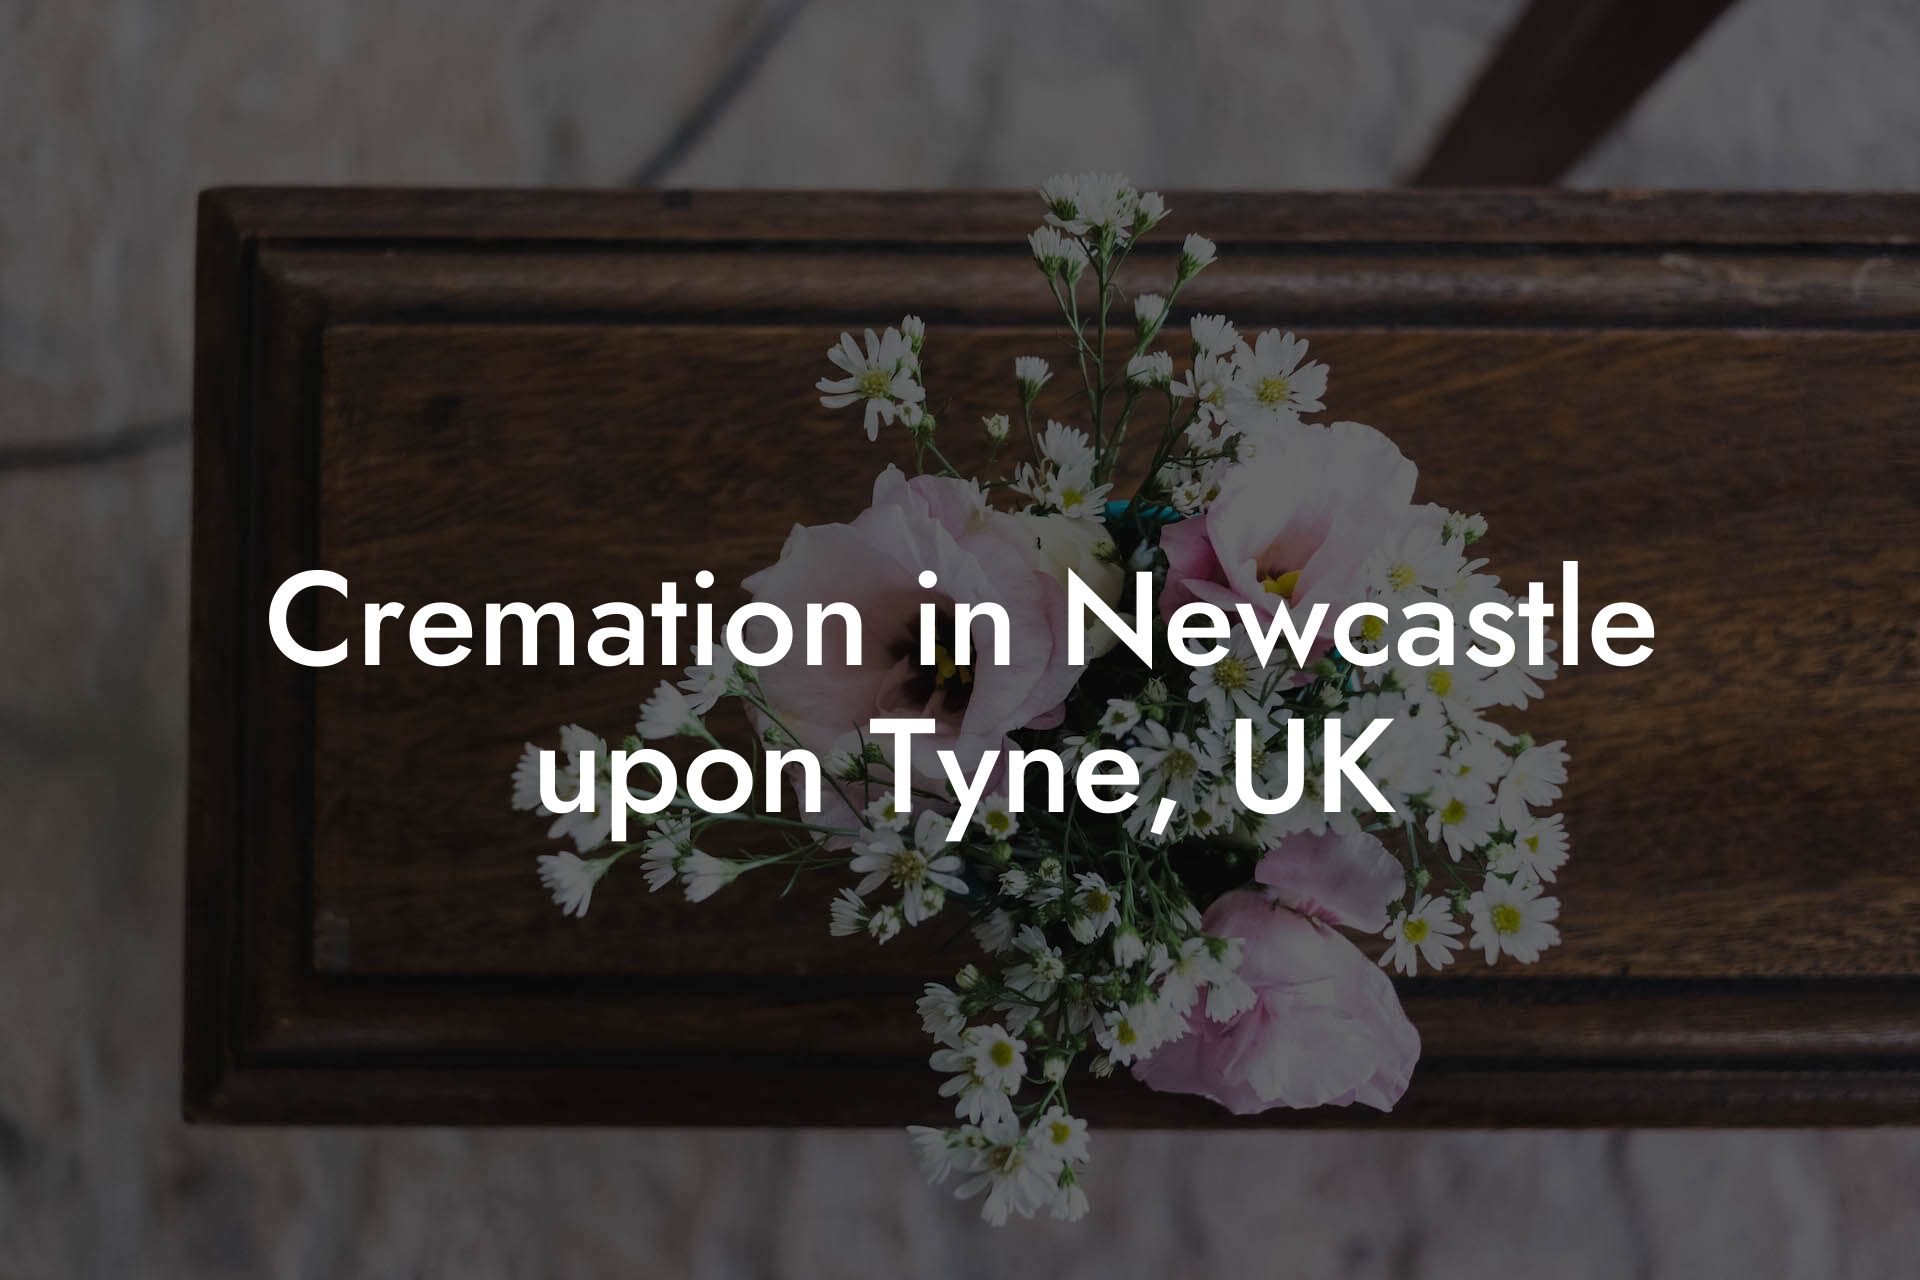 Cremation in Newcastle upon Tyne, UK